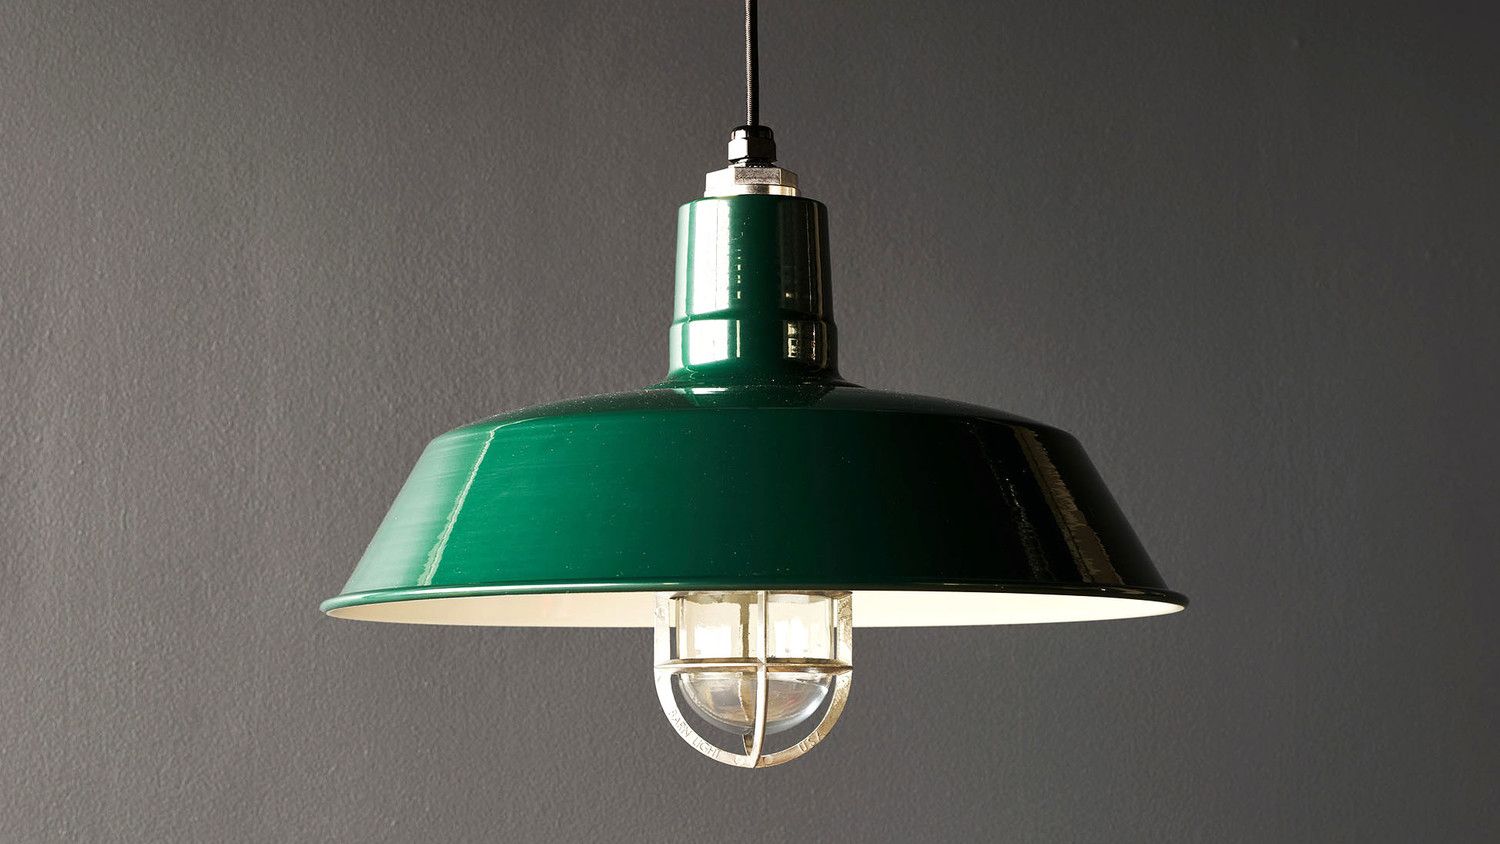 New Seasonal Sales Are Here! 48% Off Laurel Foundry Modern With Regard To Kierra 4 Light Unique / Statement Chandeliers (Photo 28 of 30)